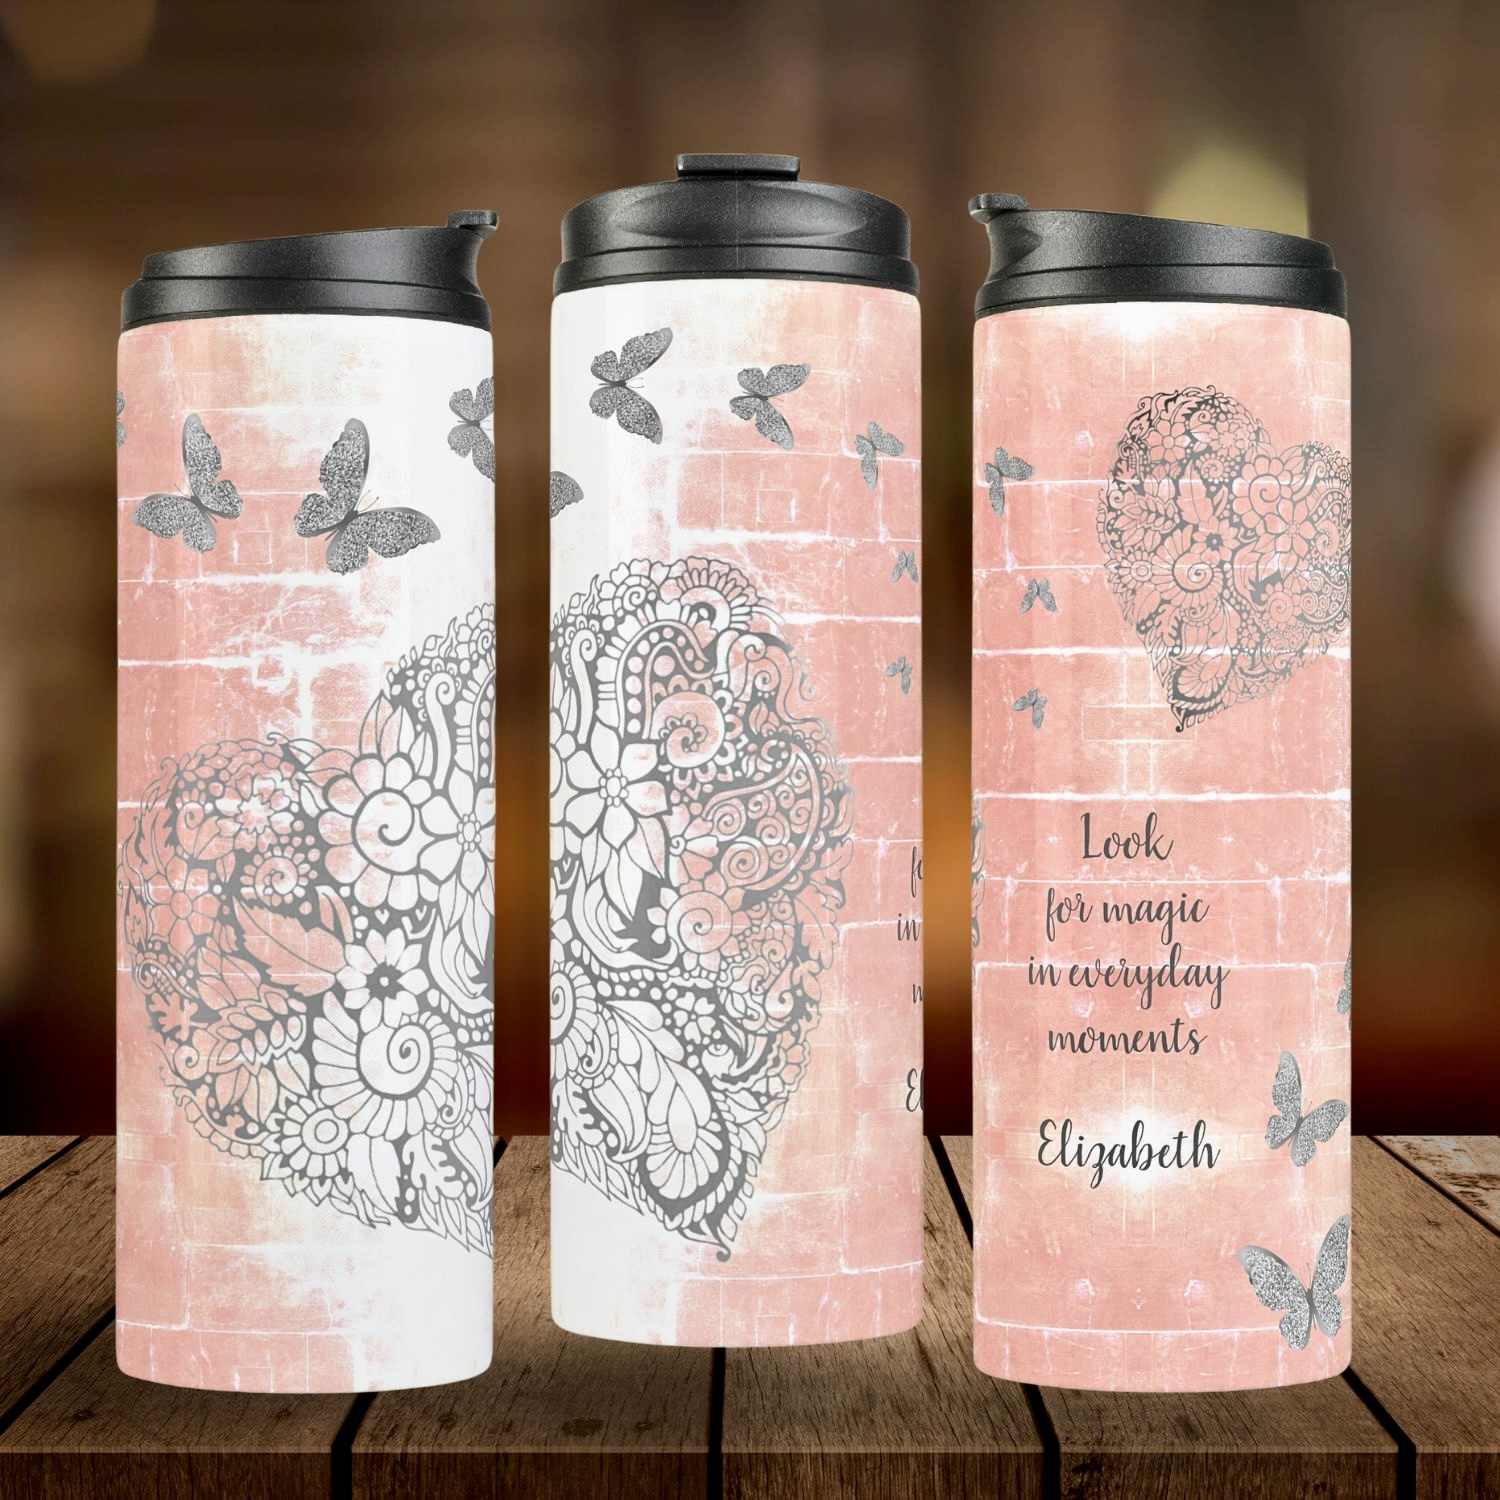 A thermal tumbler with a three-sided design: two sides featuring a rustic peach background with a gray heart and silver butterflies, and the other side displaying an inspiring message.